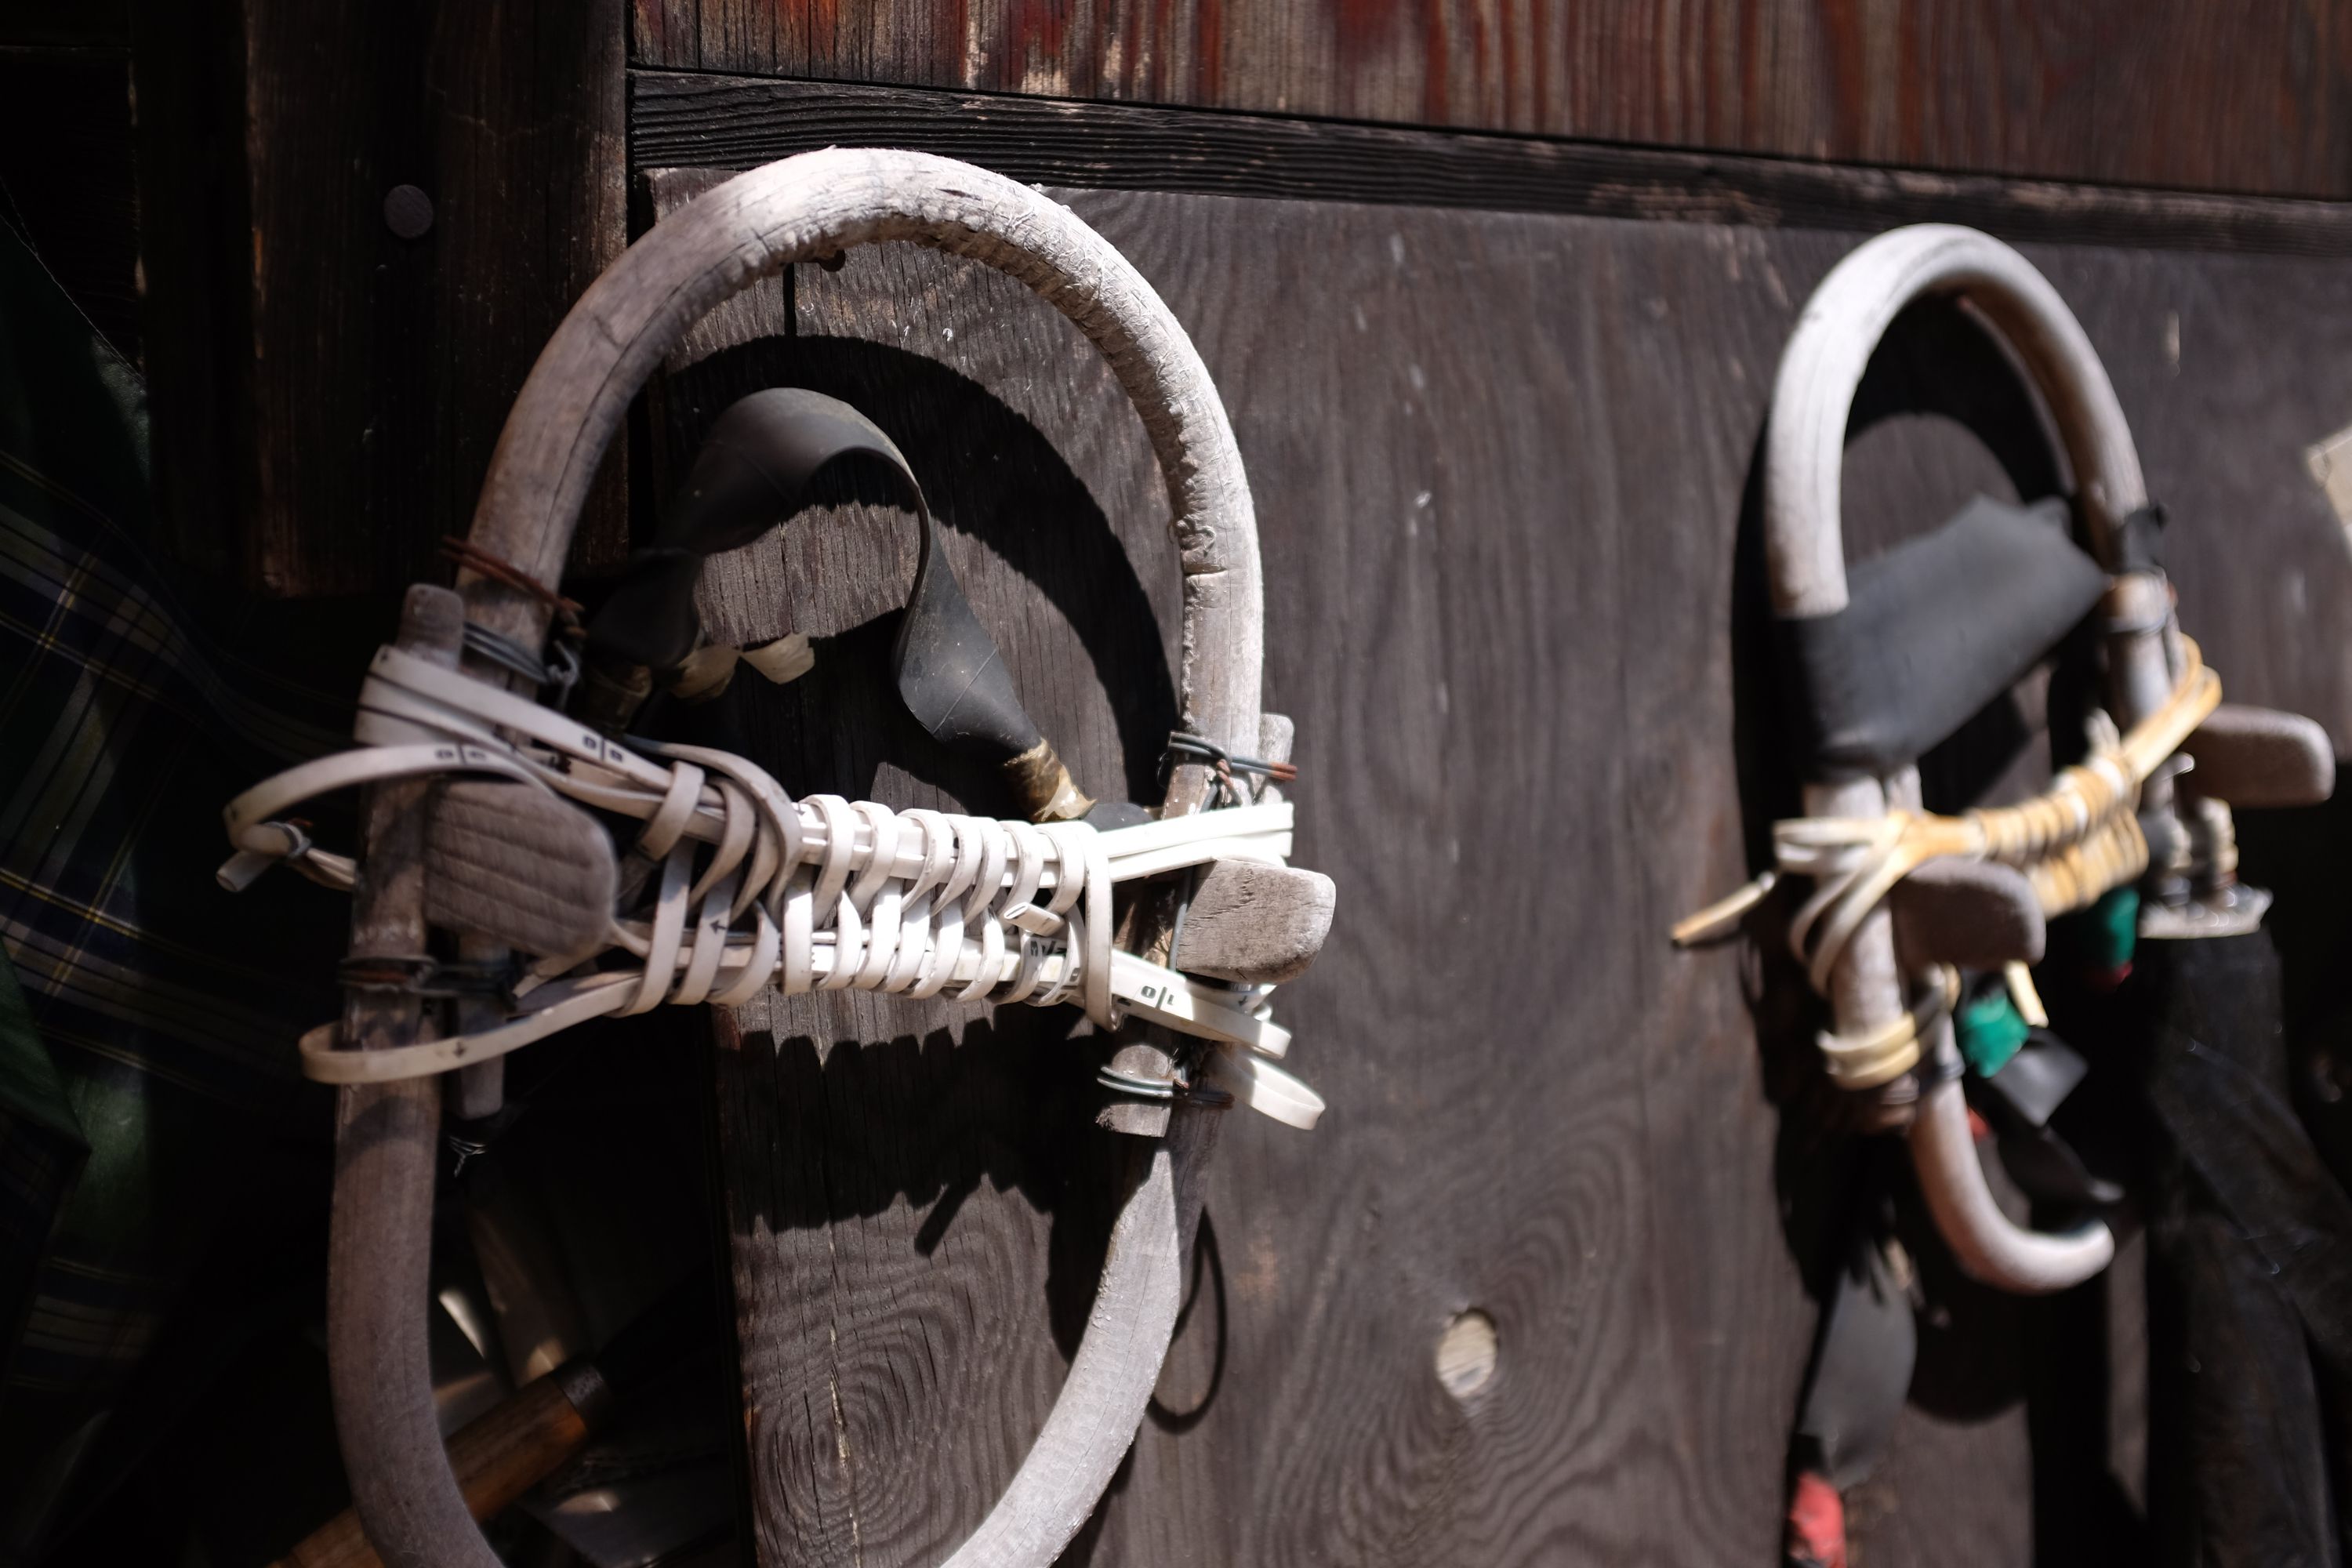 A pair of old snowshoes on a wall.